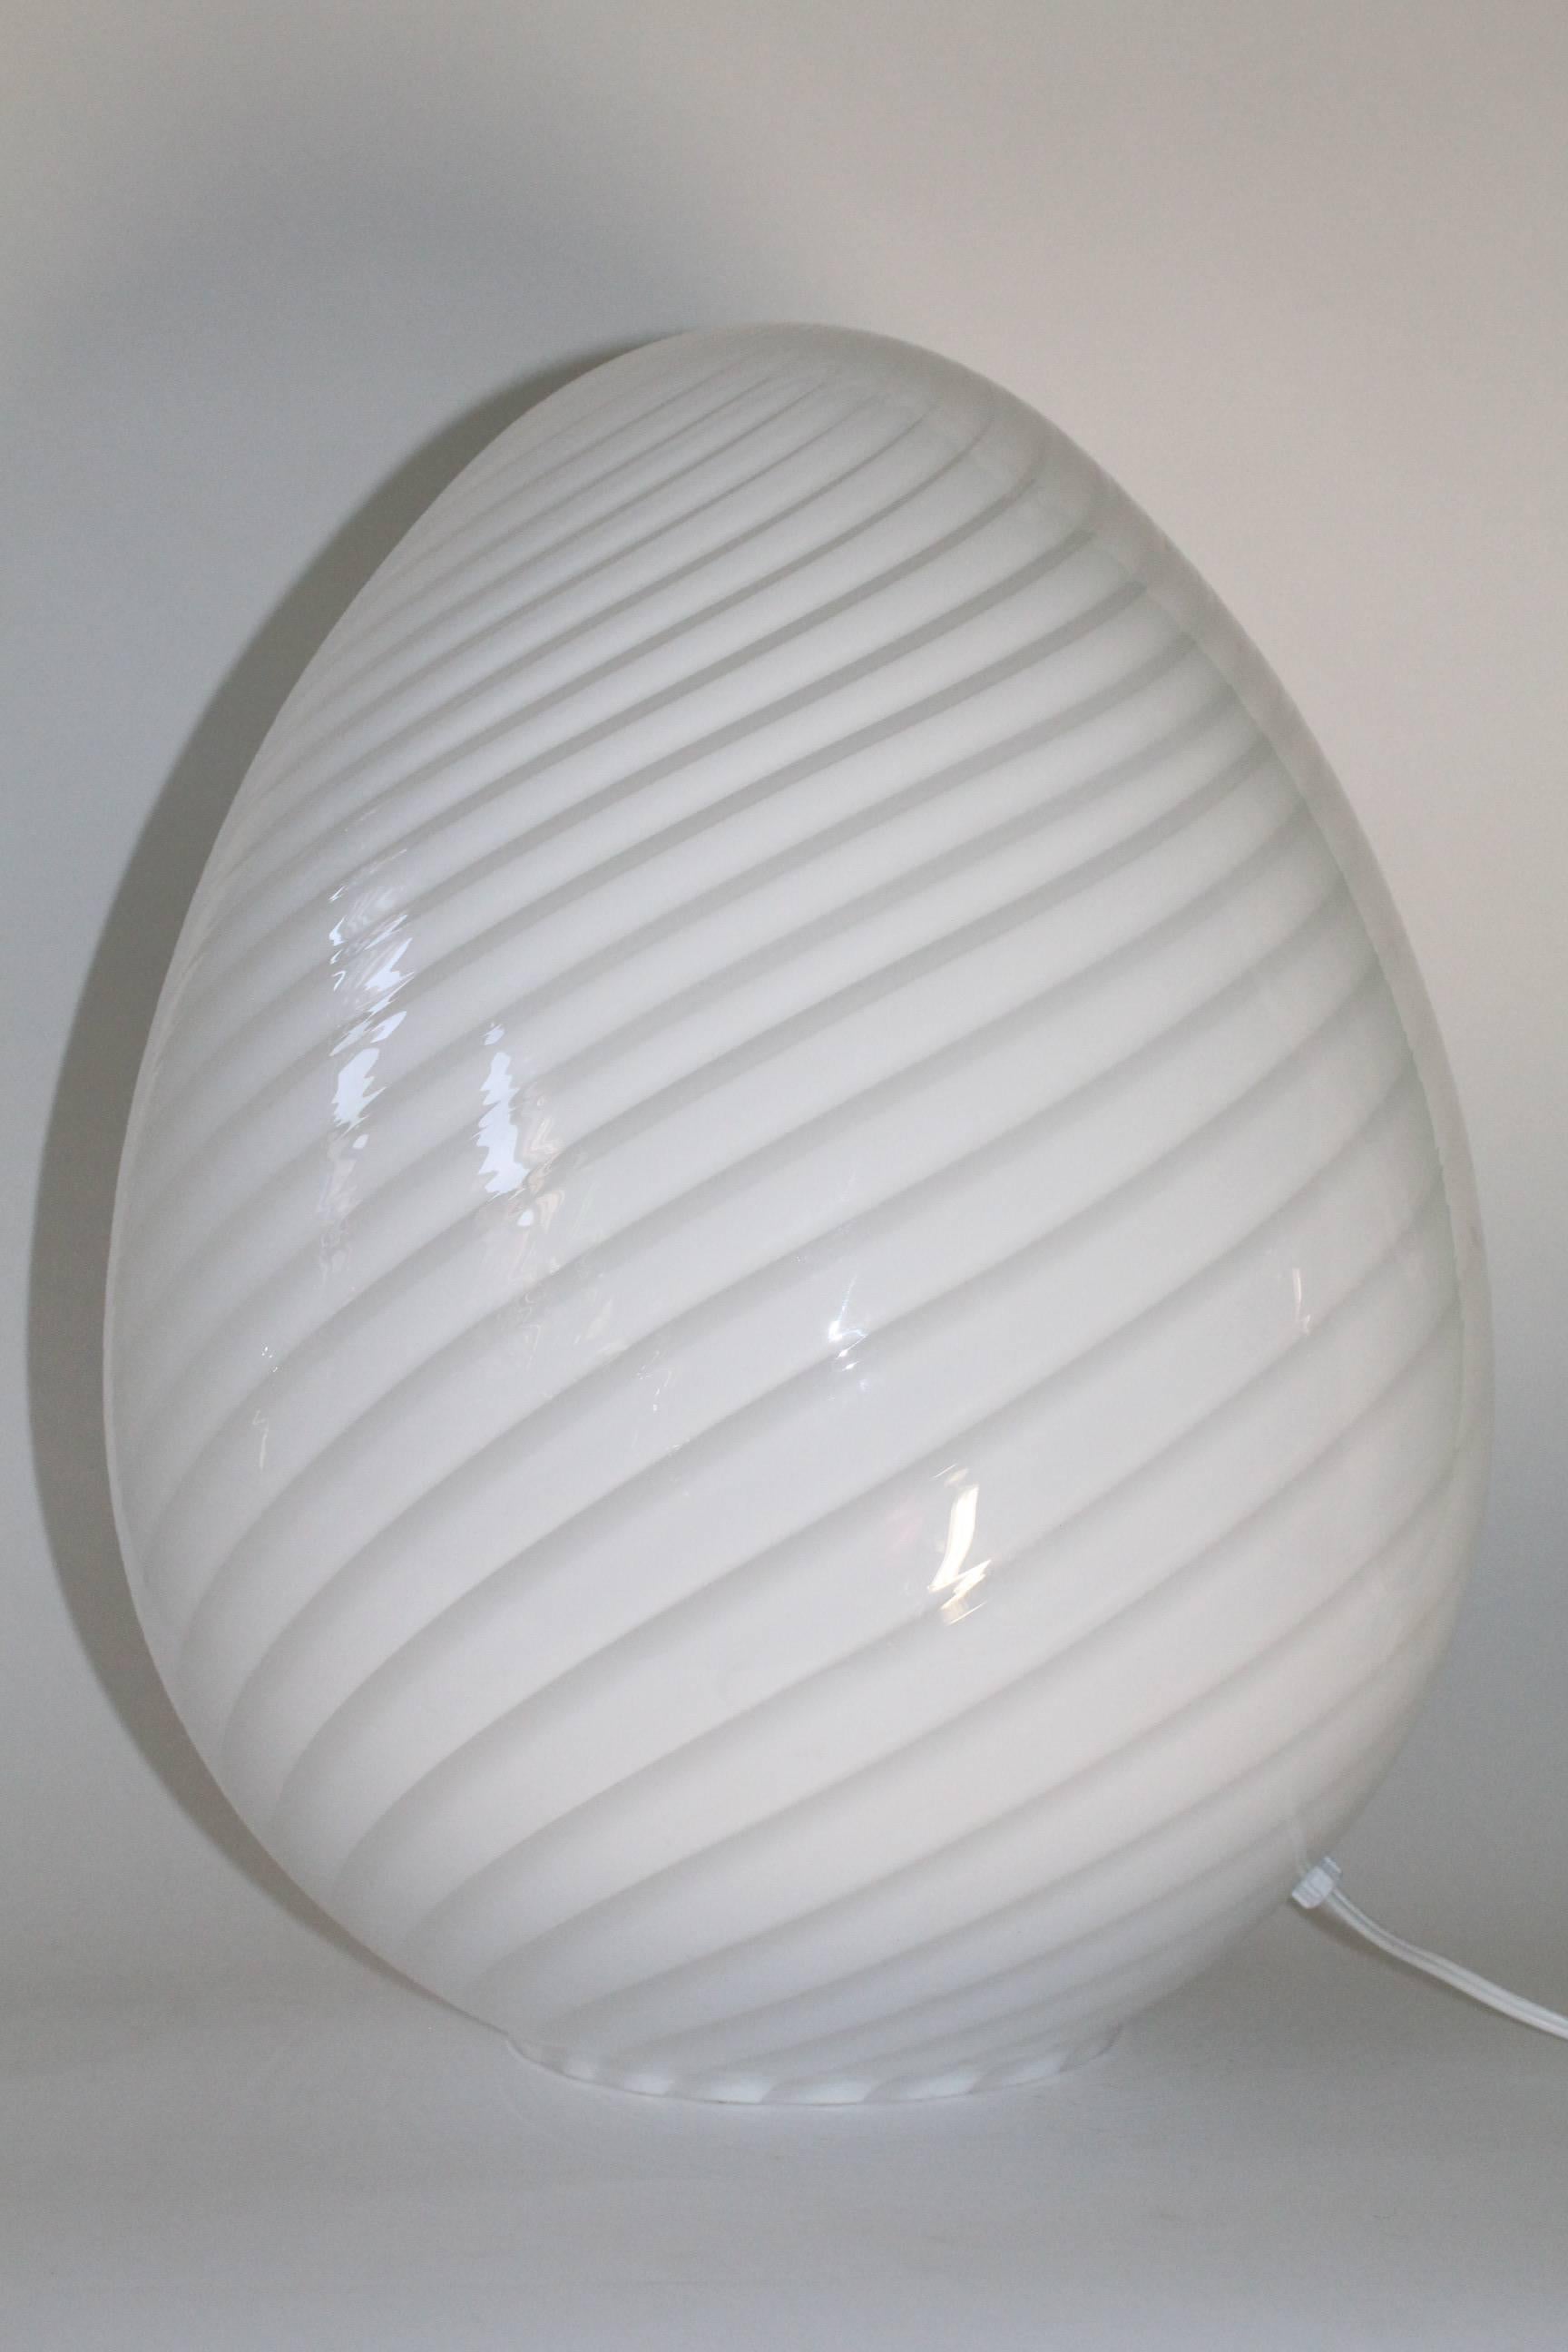 Pair of egg form table lamps with white swirls by Vetri, manufactured circa 1970s in Murano Italy, each including single socket. Markings include sticker label [Vetri Murano]. The vintage lamps remain in mint condition, consistent with age and use.